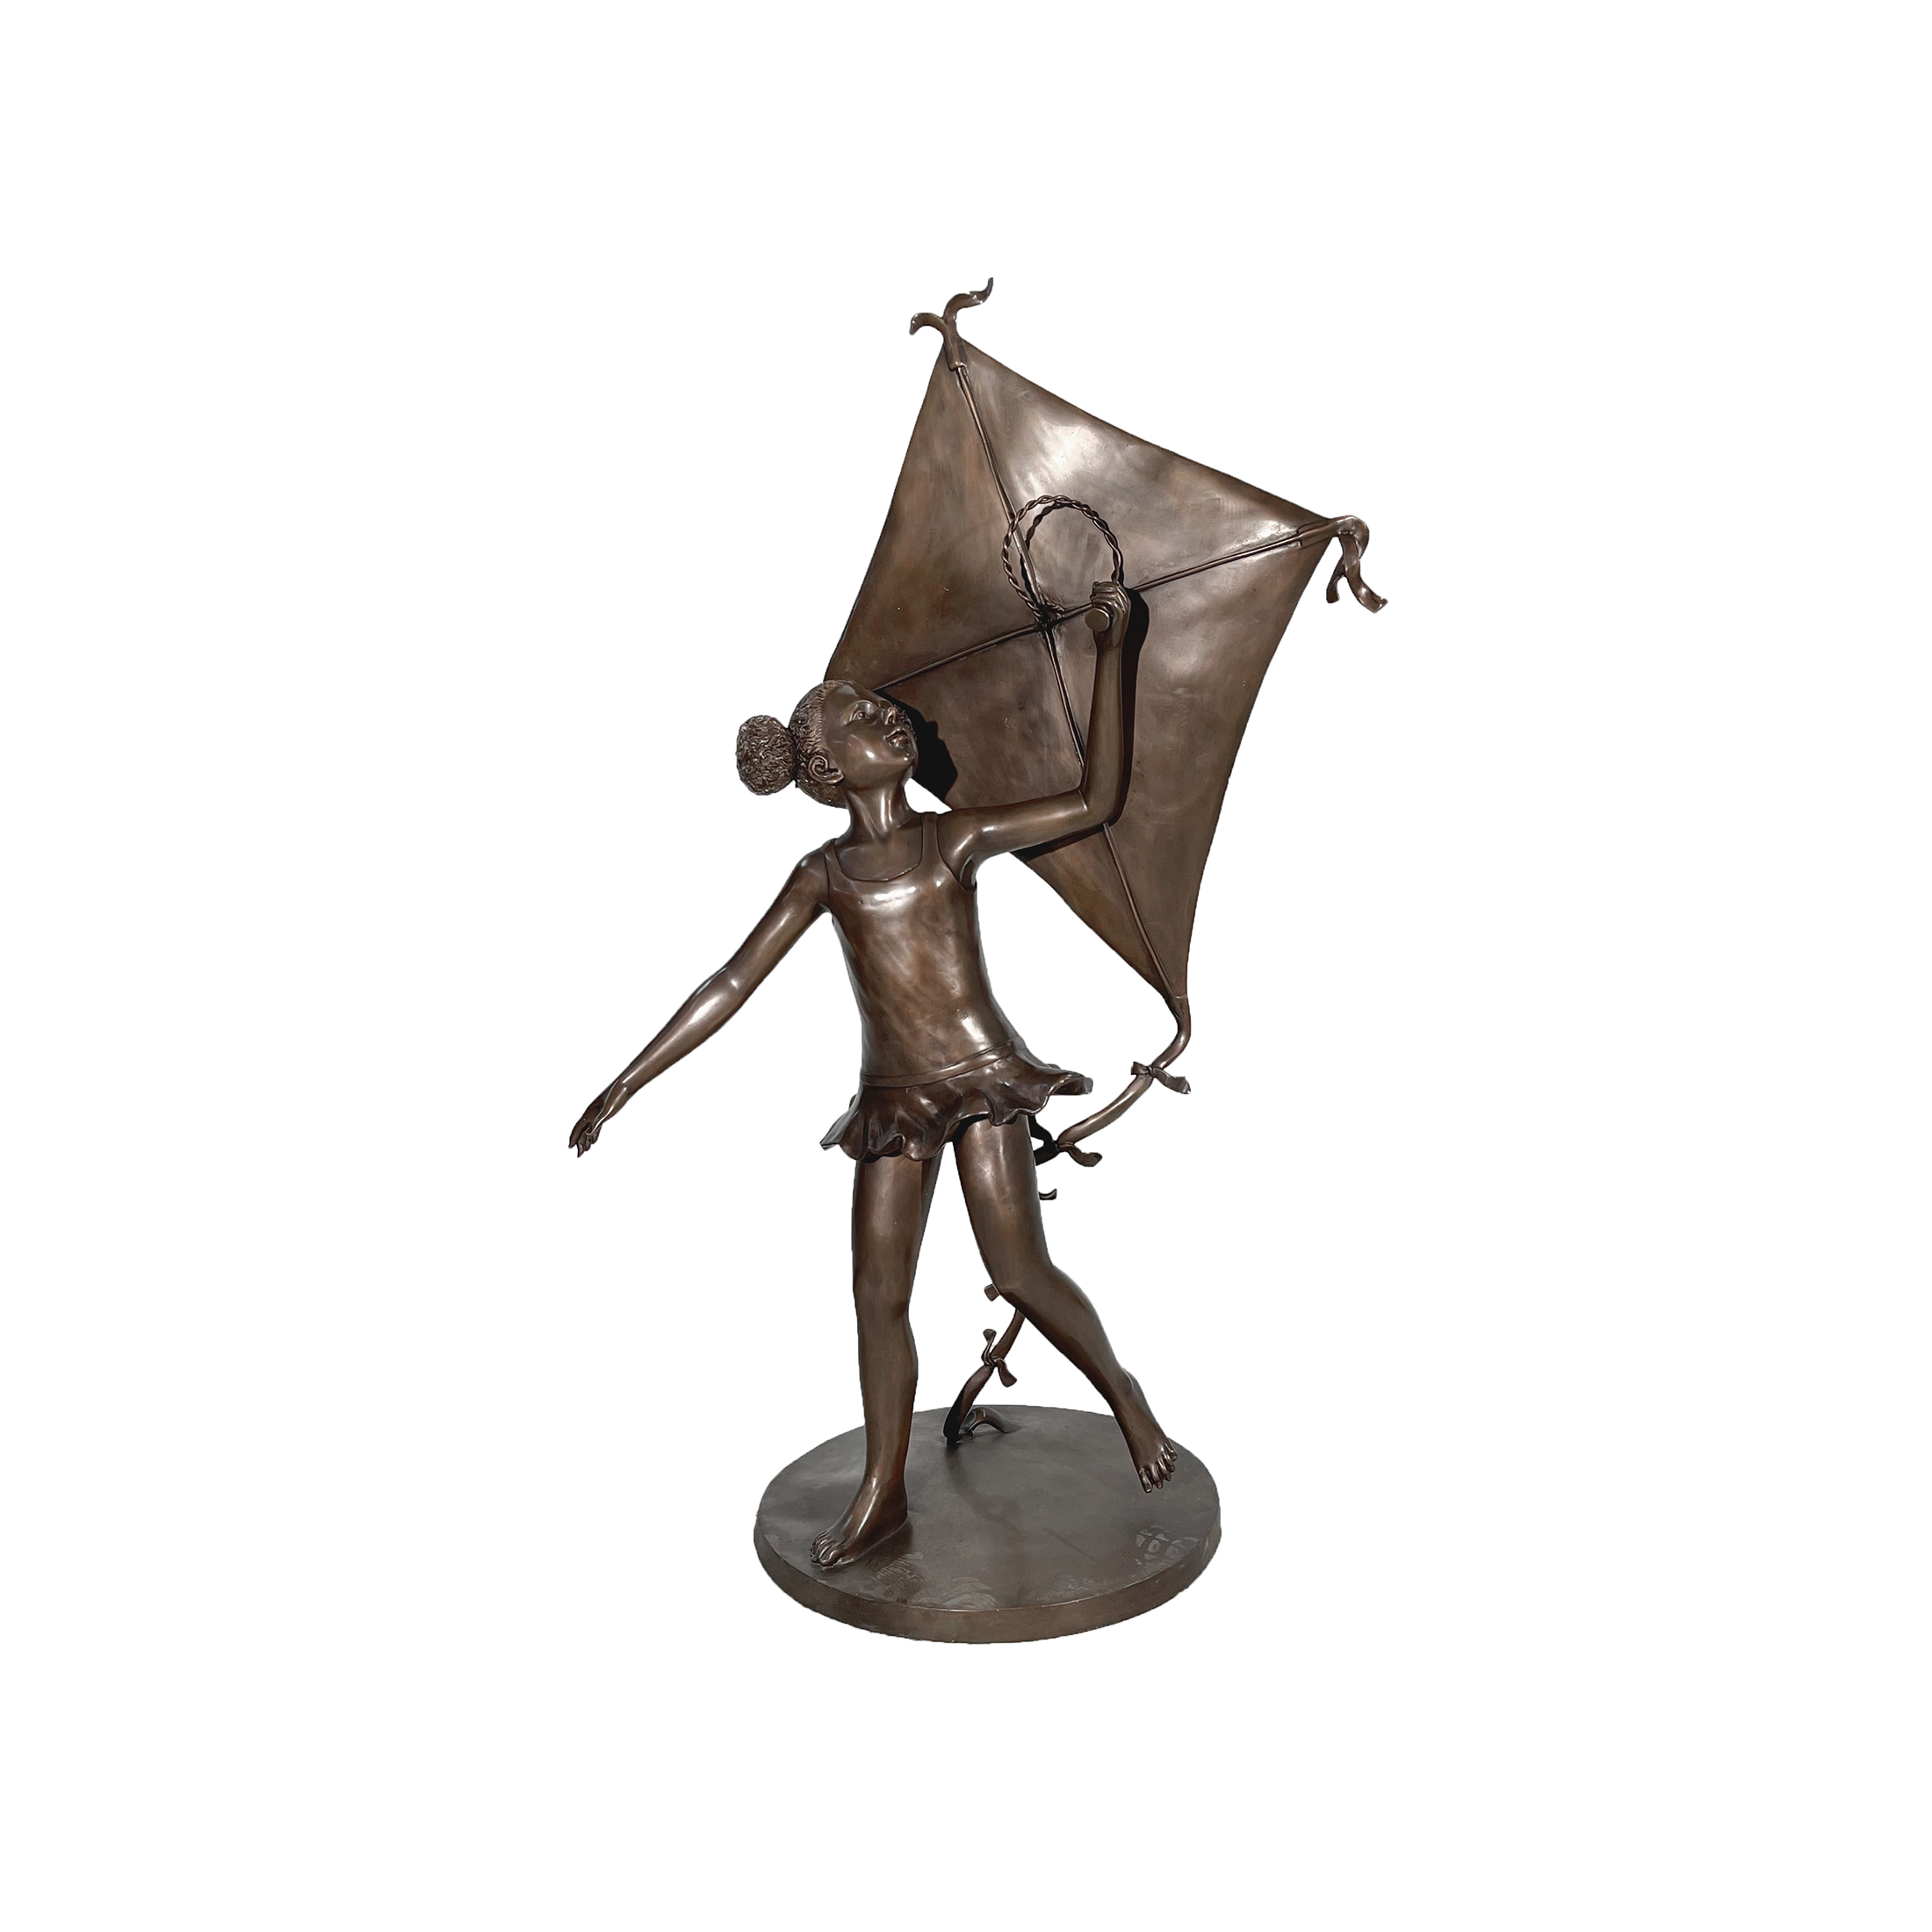 SRB099812 Broze Little Girl Flying Kite Sculpture exclusively designed and produced by Metropolitan Galleries Inc